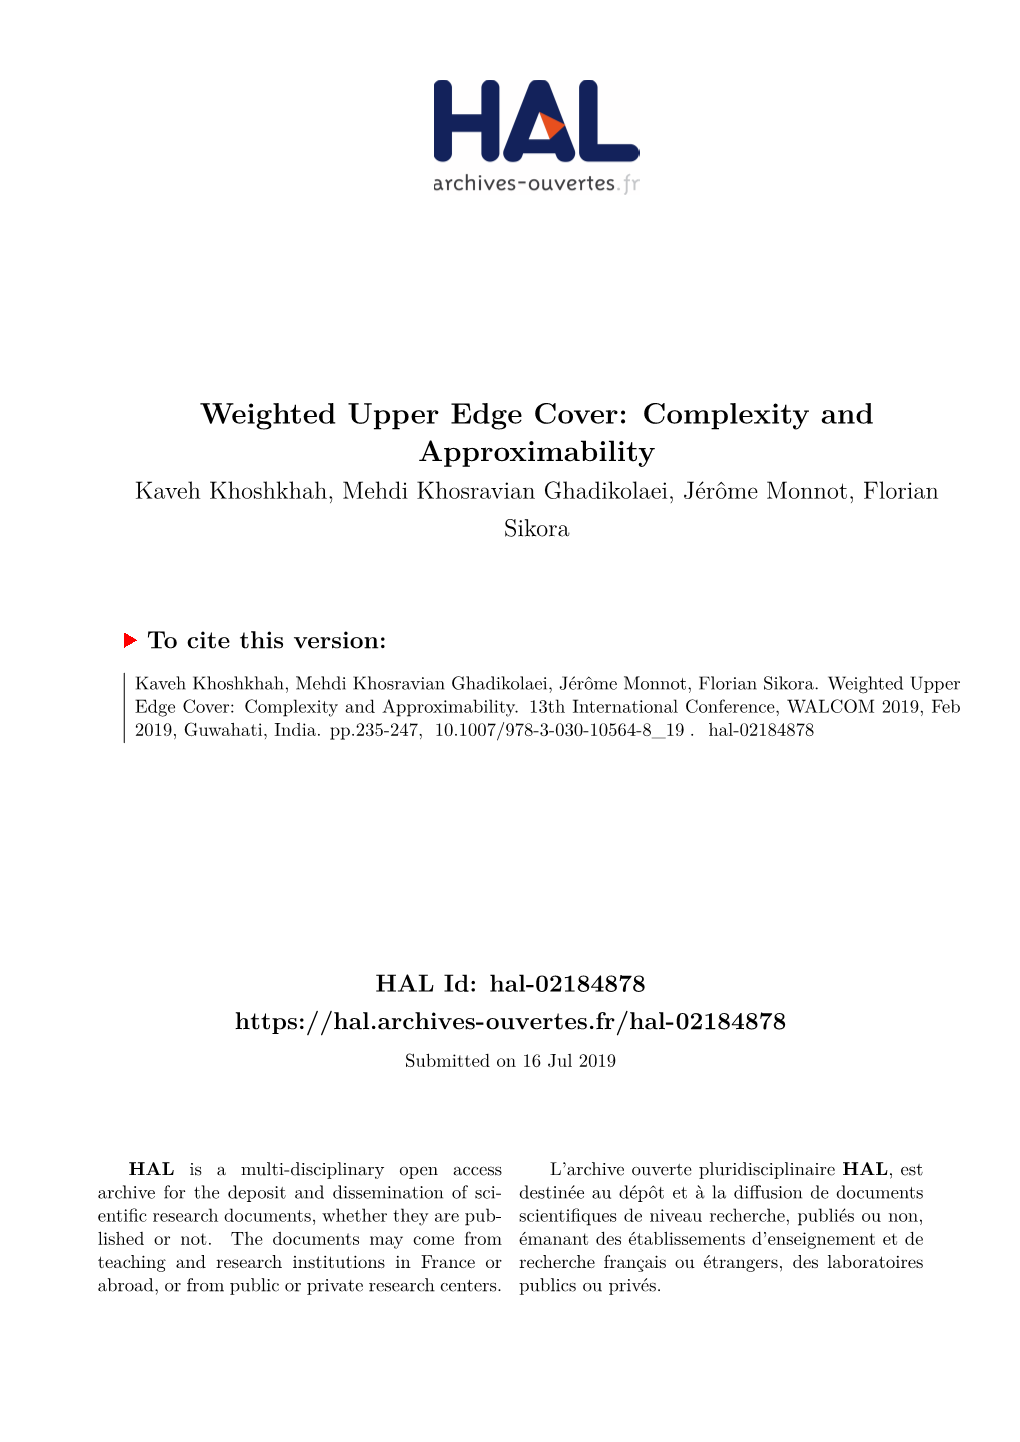 Weighted Upper Edge Cover: Complexity and Approximability Kaveh Khoshkhah, Mehdi Khosravian Ghadikolaei, Jérôme Monnot, Florian Sikora